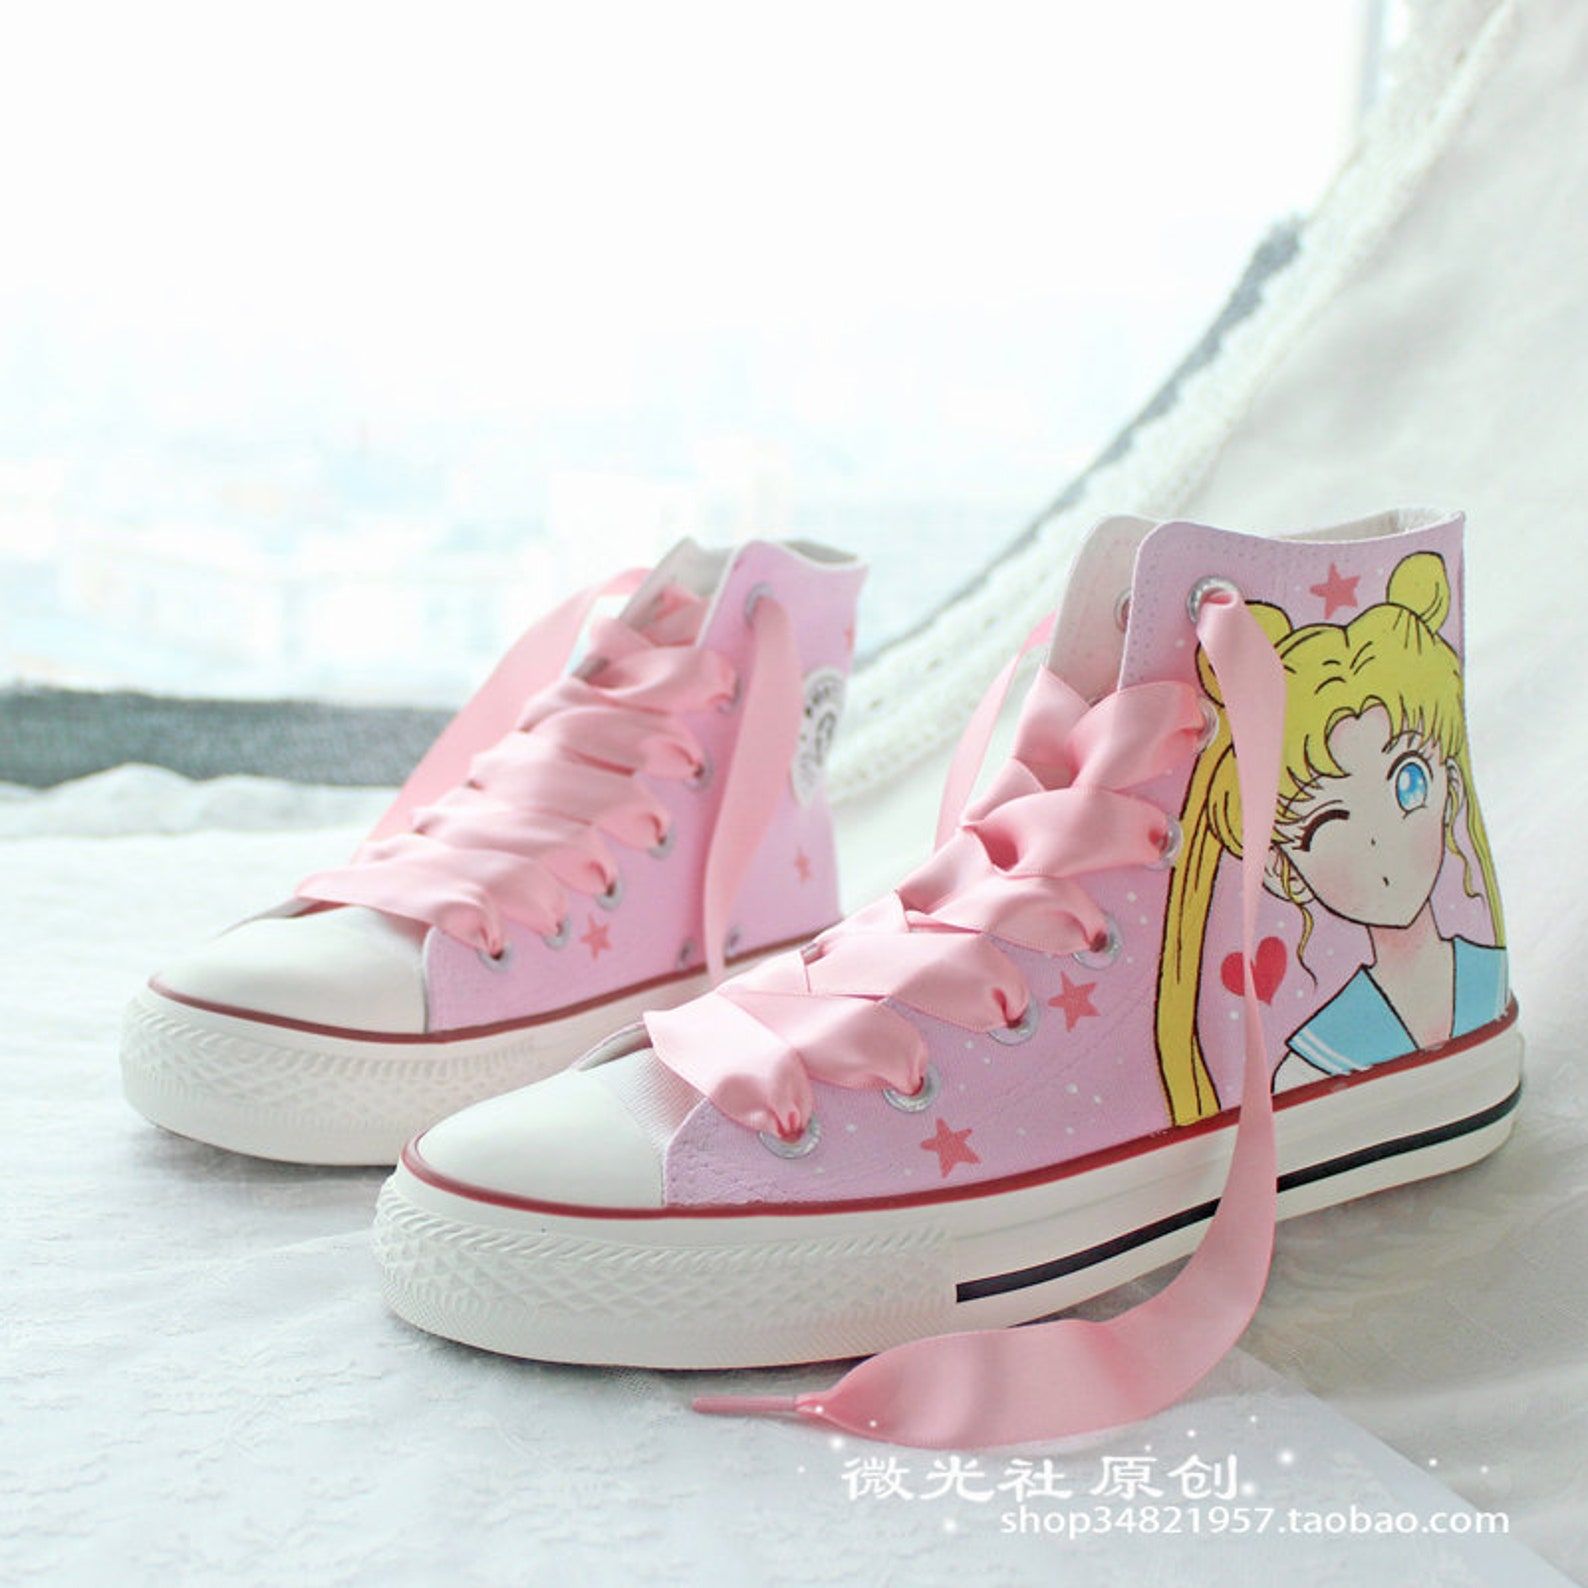 hand painted sailor moon sneakers